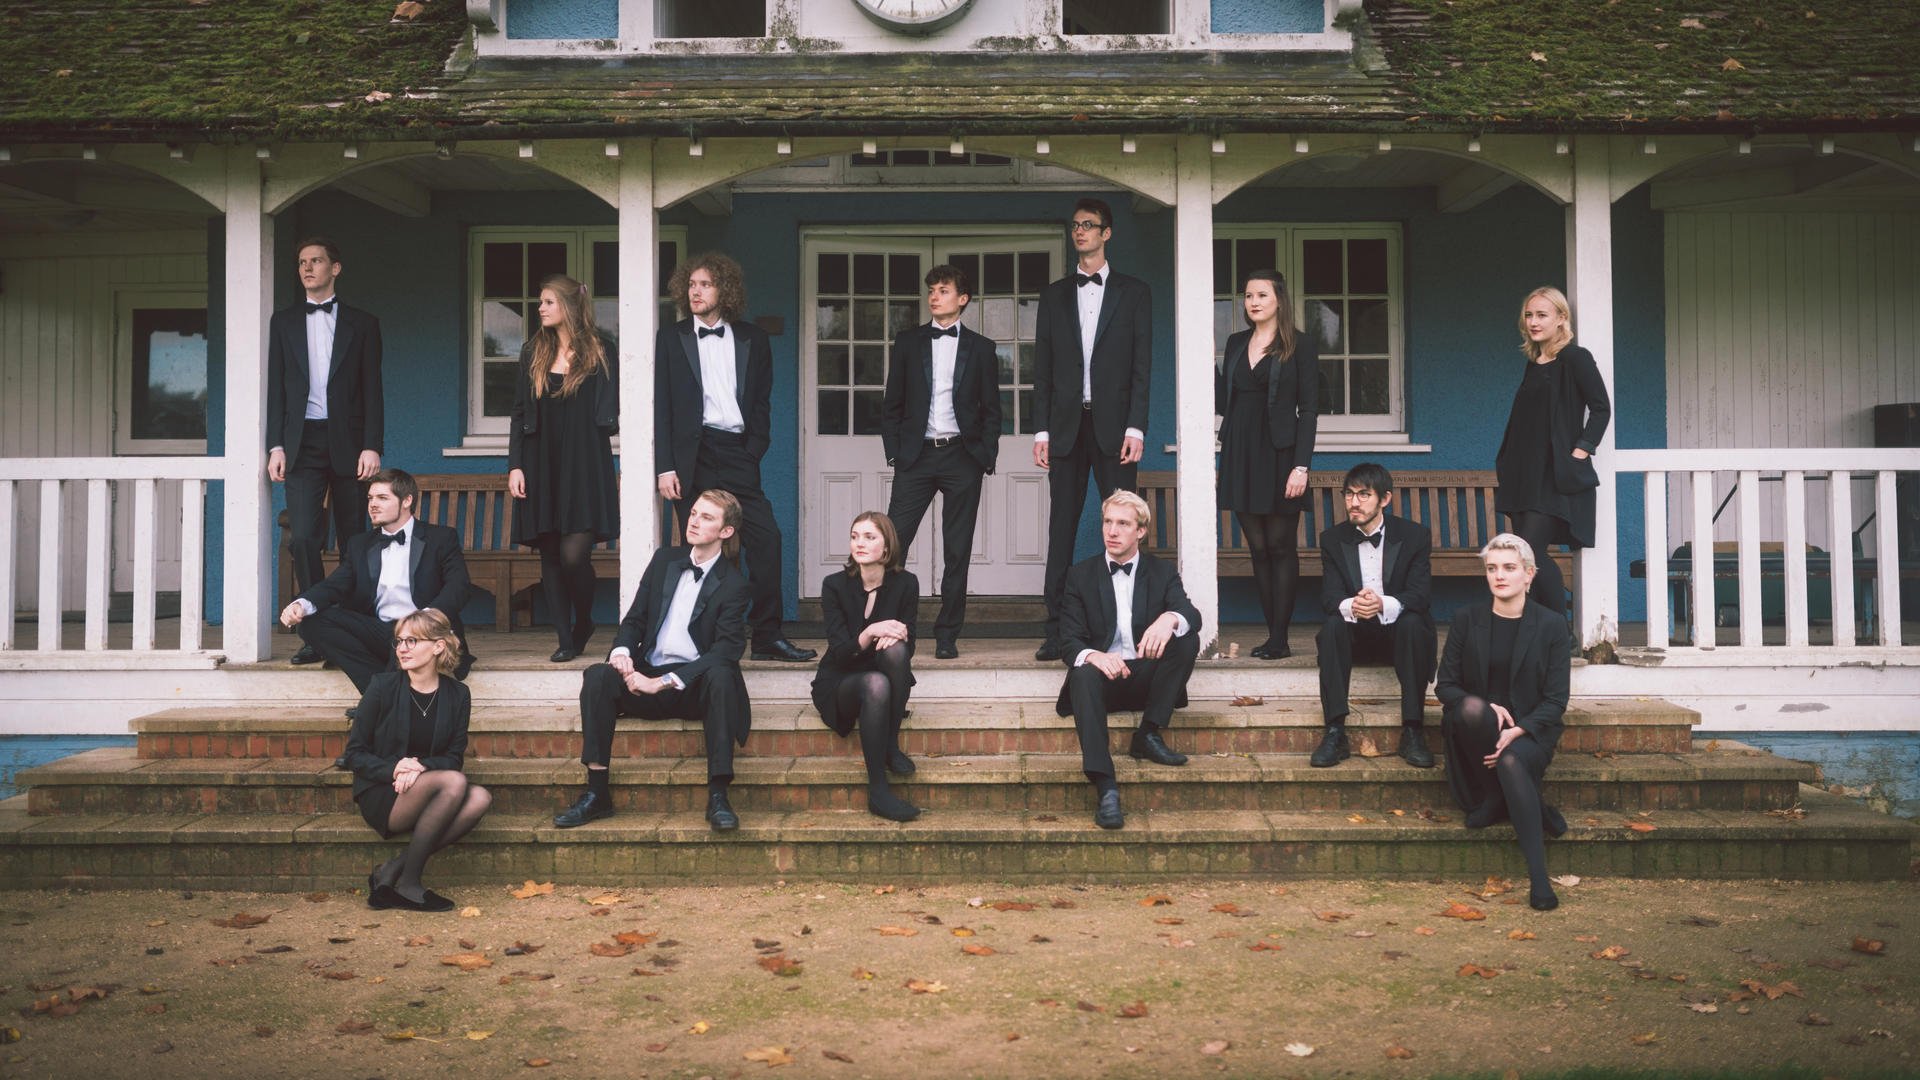 Full house: The Oxford Gargoyles will perform and teach a cappella during their time in Hong Kong.